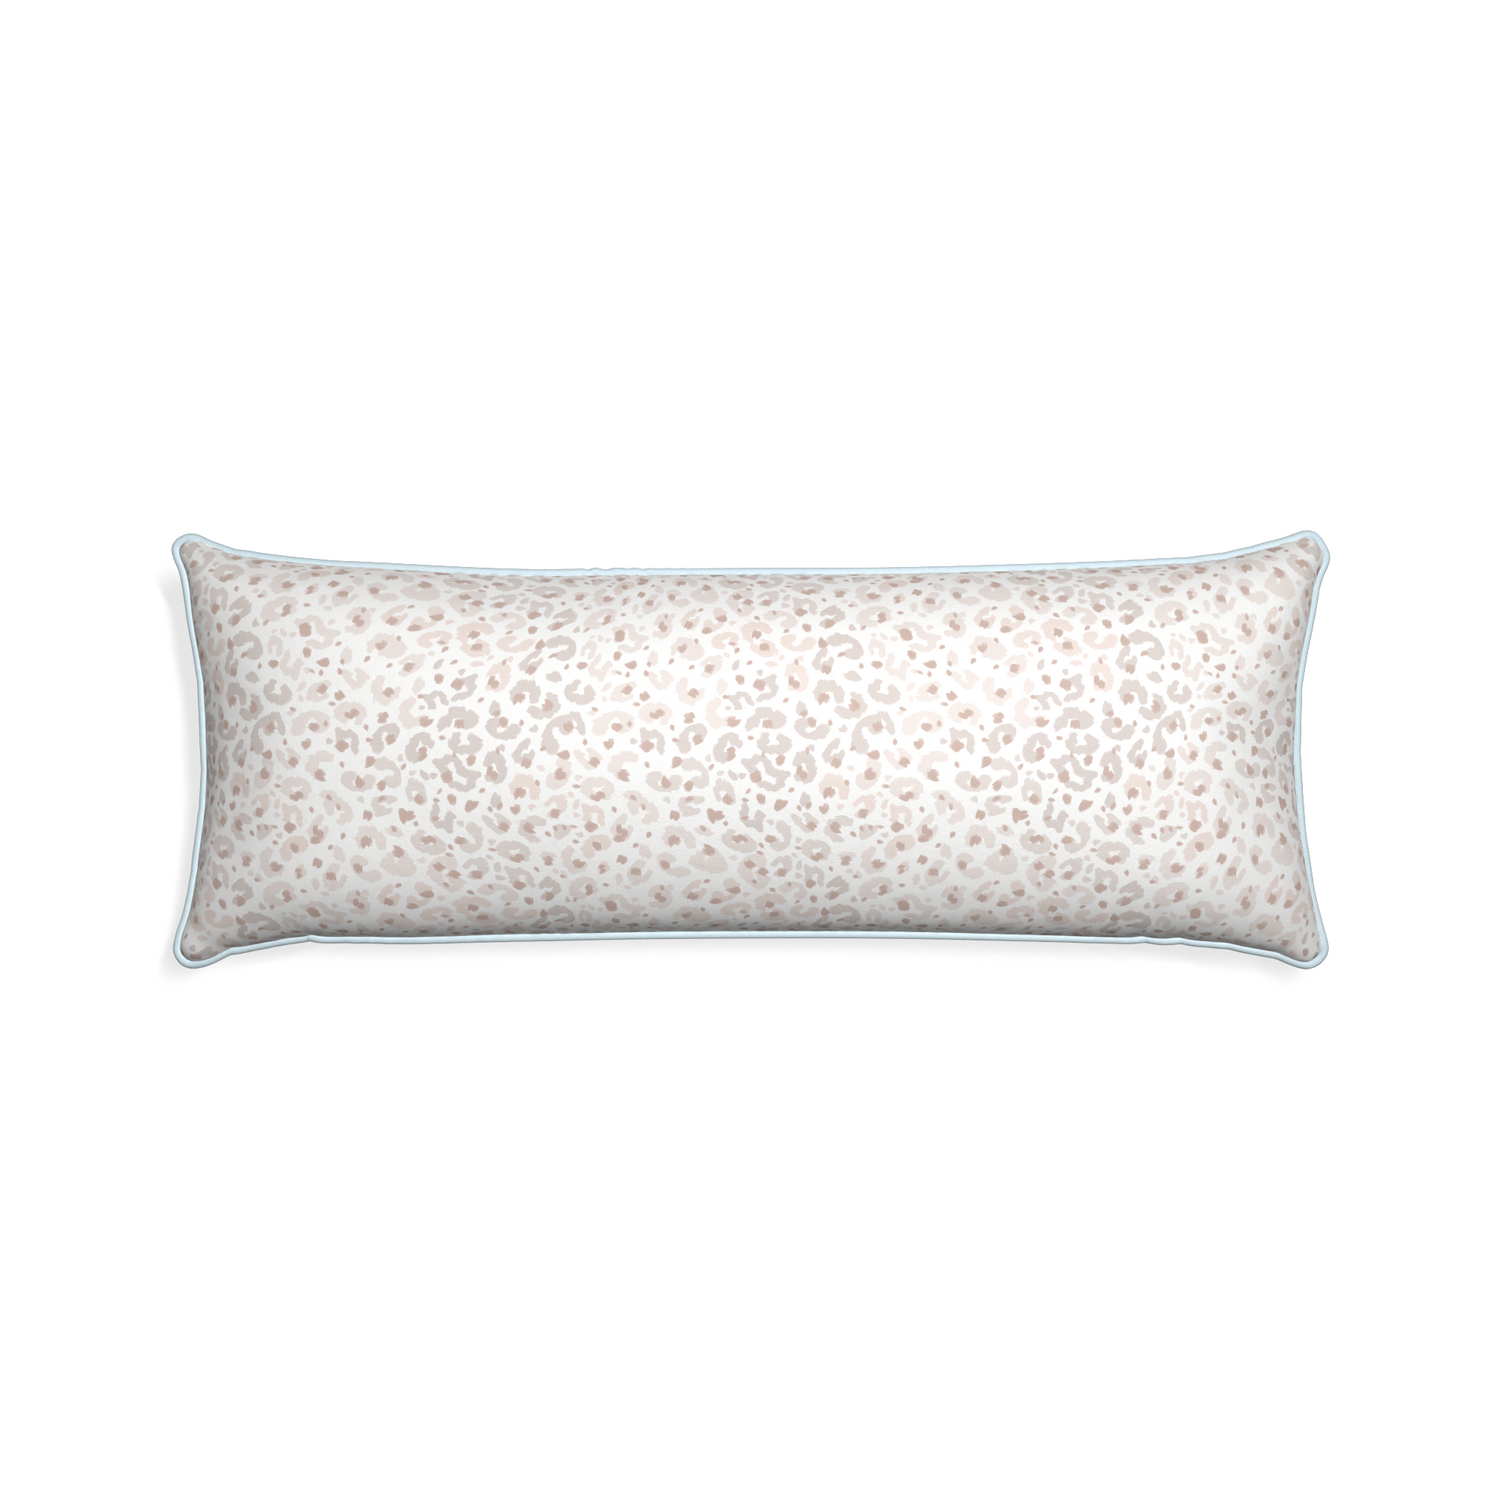 Xl-lumbar rosie custom beige animal printpillow with powder piping on white background